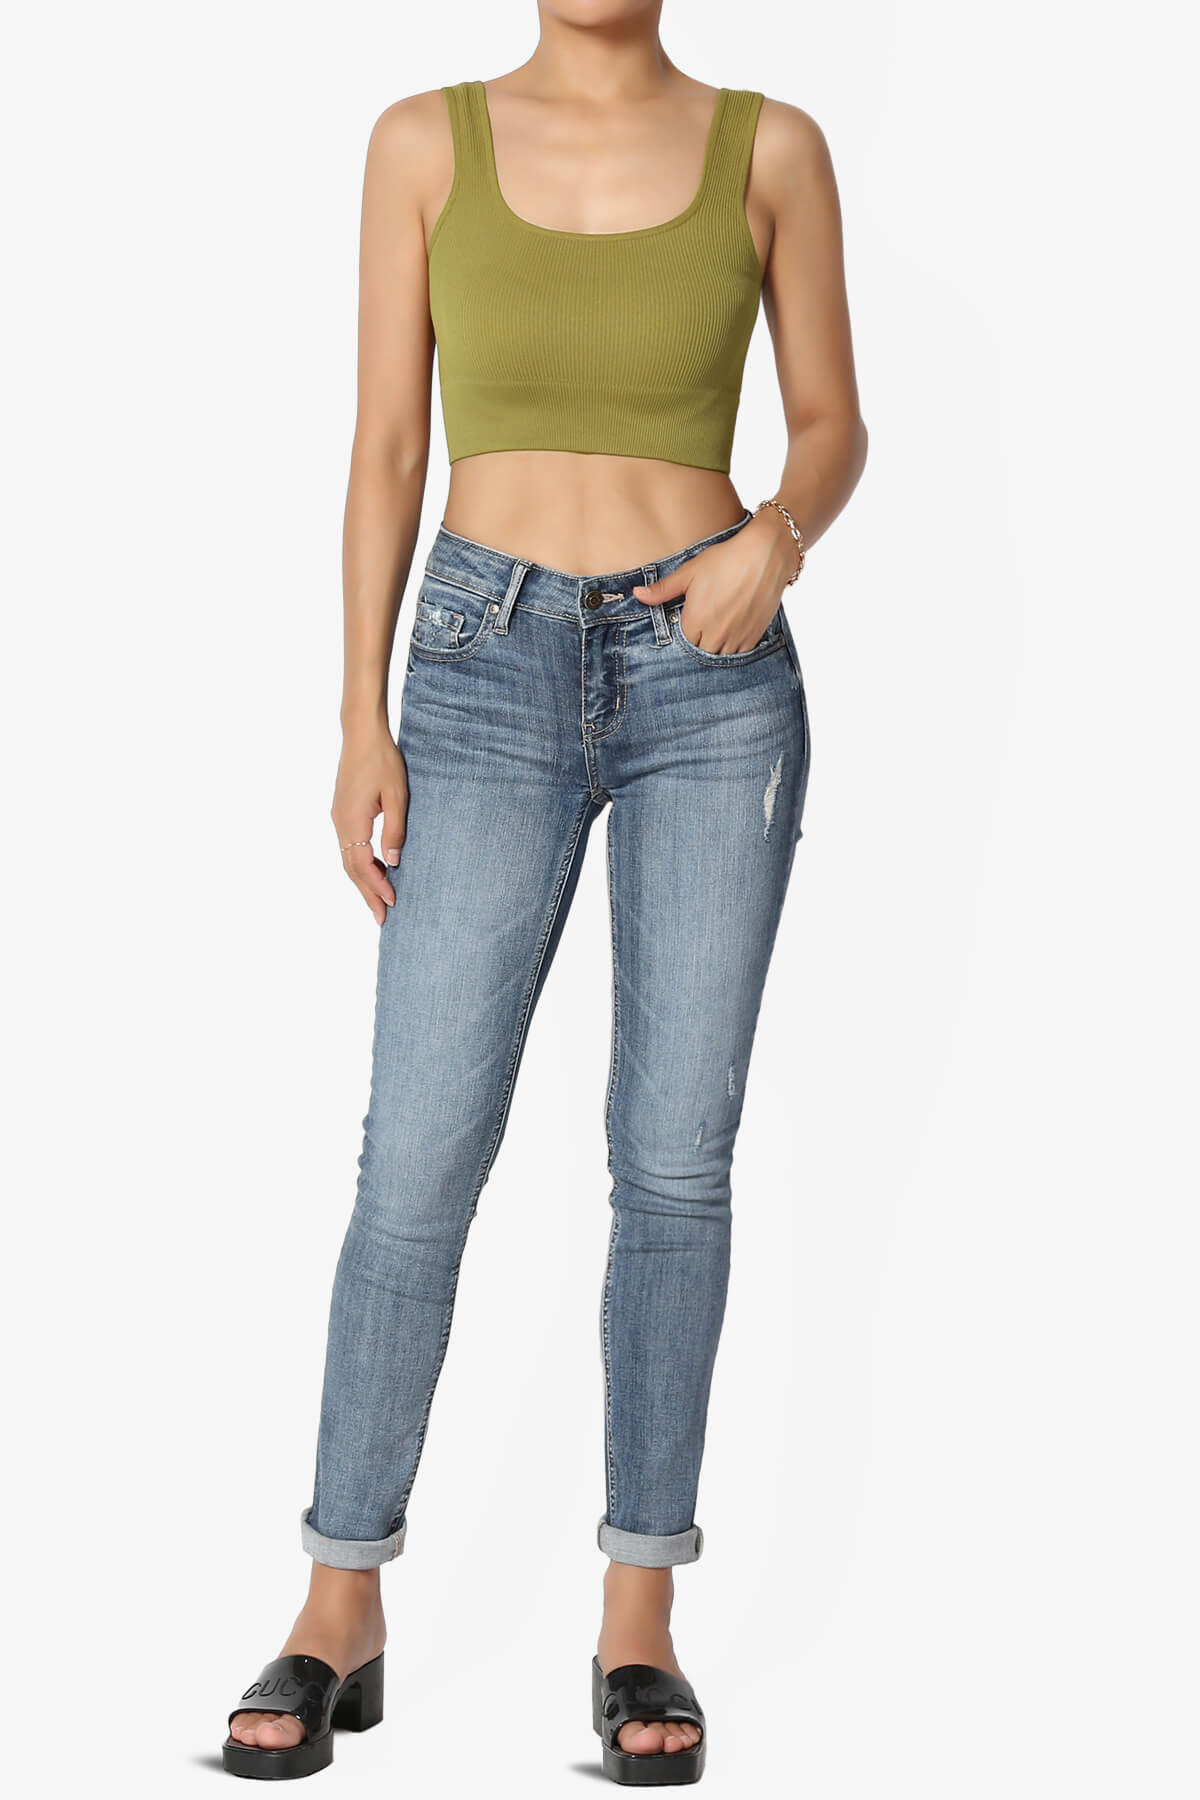 Hilde Ripped Seamless Square Neck Crop Tank Top OLIVE MUSTARD_6